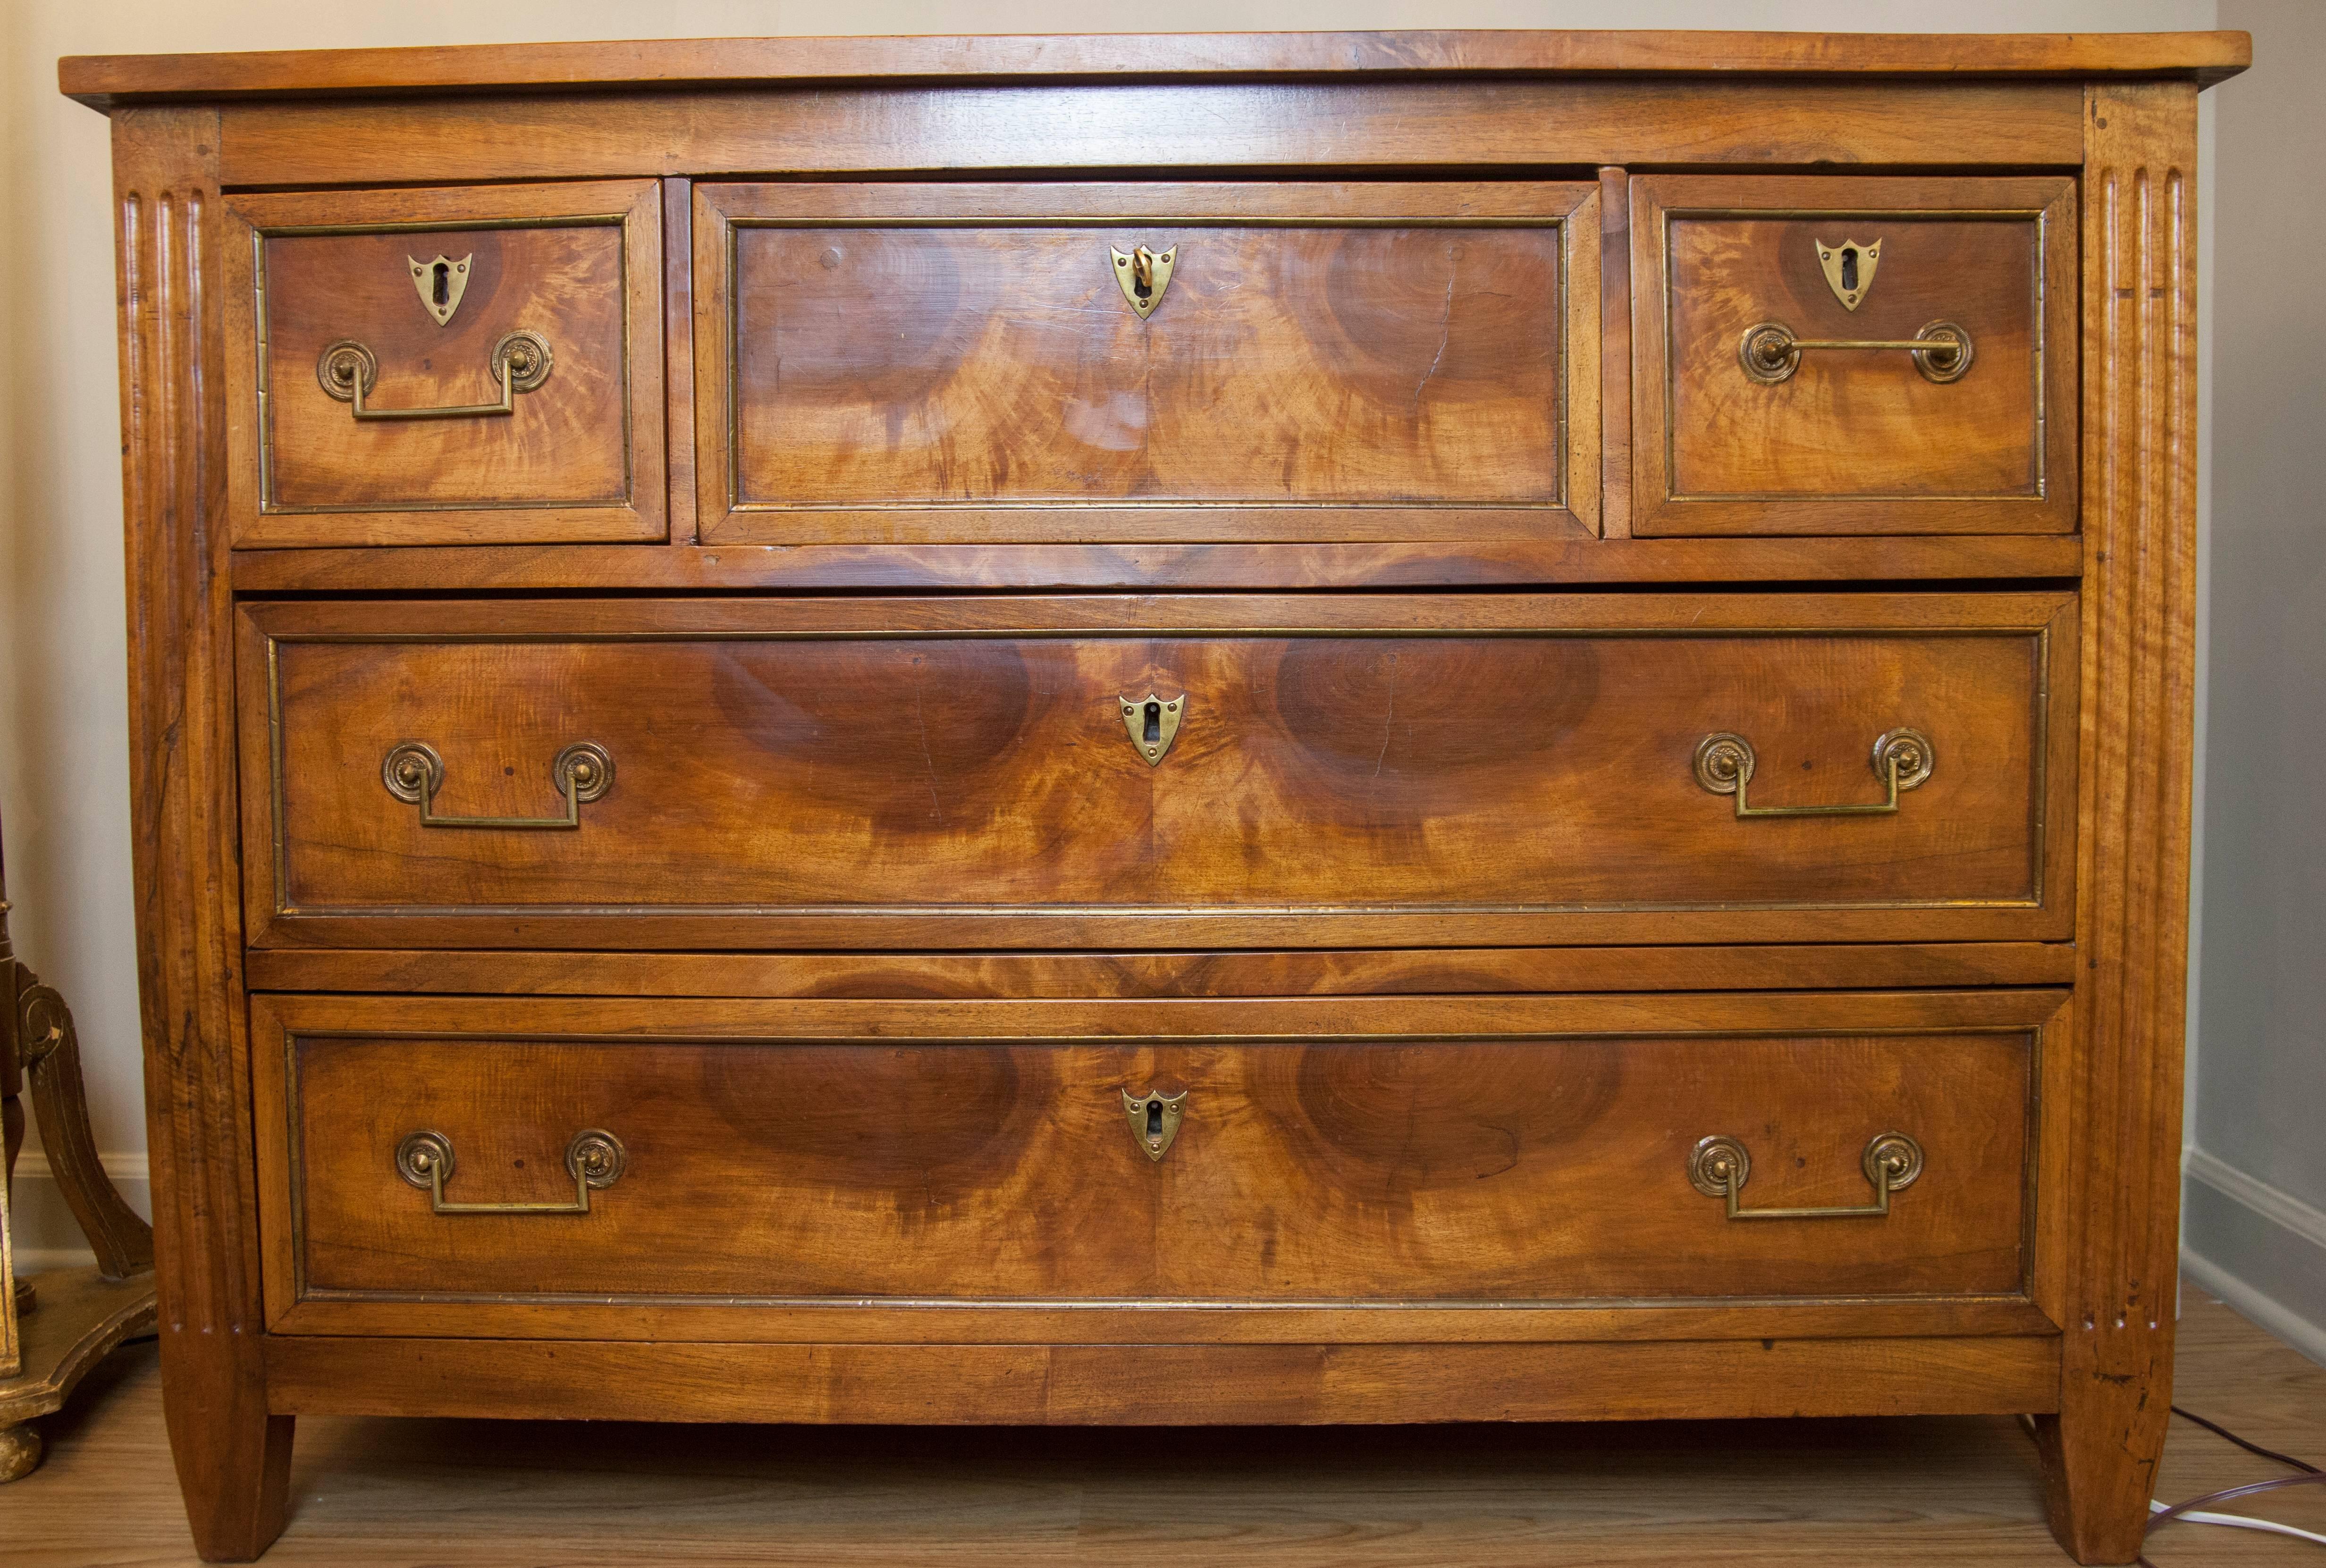 This 18th century Louis XVI style walnut commode features four drawers with shield shaped escutcheons and one pull down secretaire. The secretaire has a leather top and two drawers. Each of the commode front drawers has a brass or bronze detailing